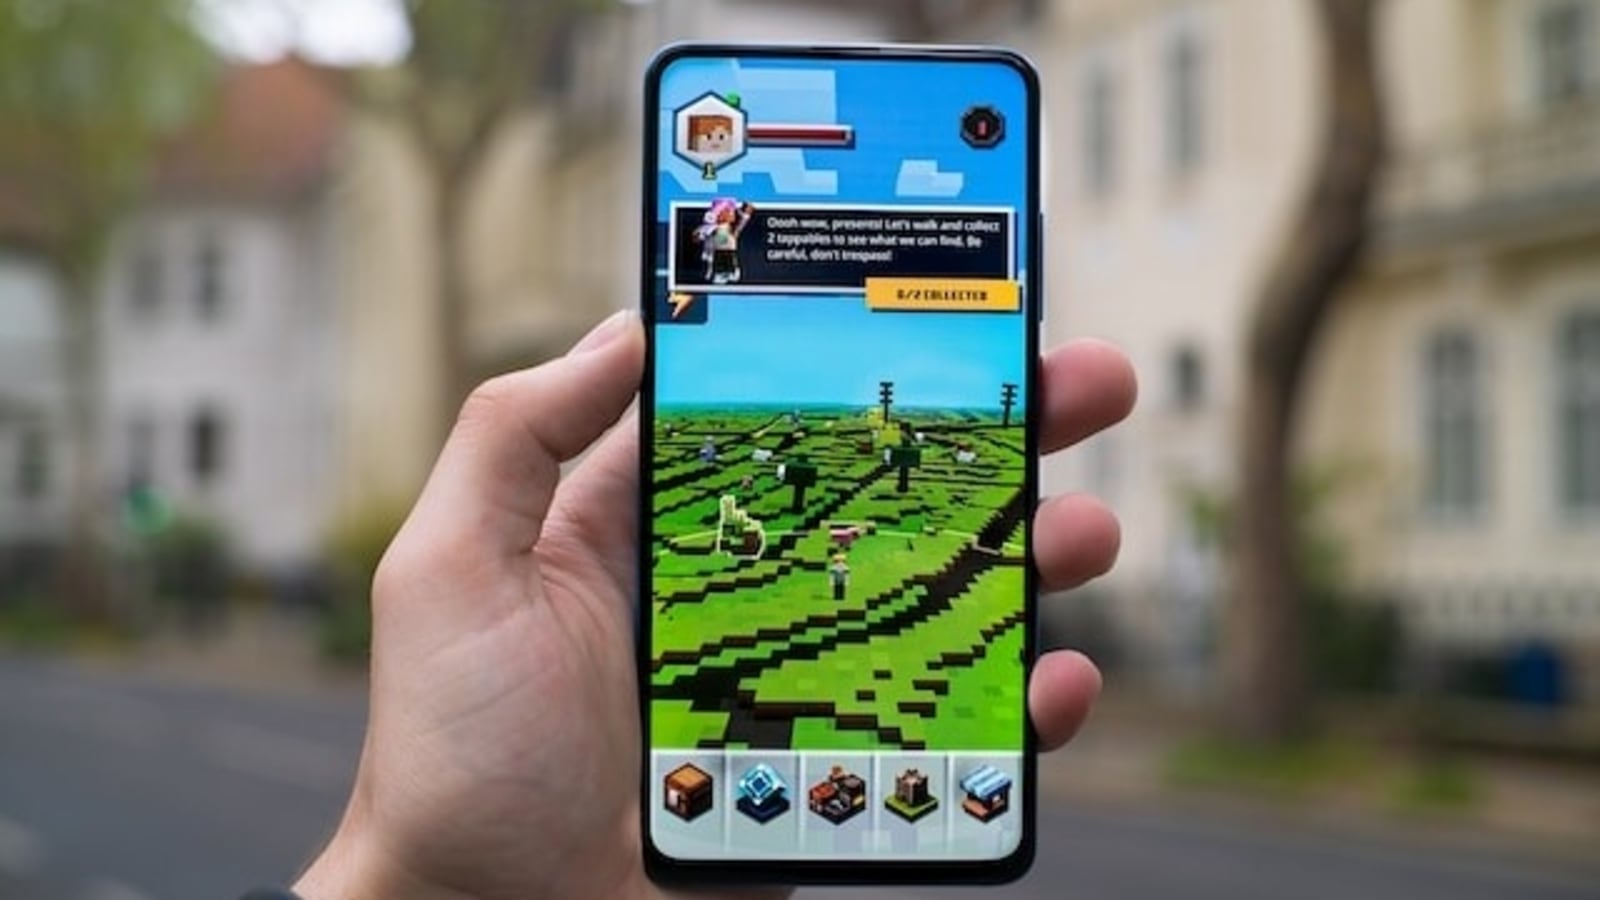 Minecraft apps that hijack phones and threaten users into paying out could  have cheated millions of users, The Independent